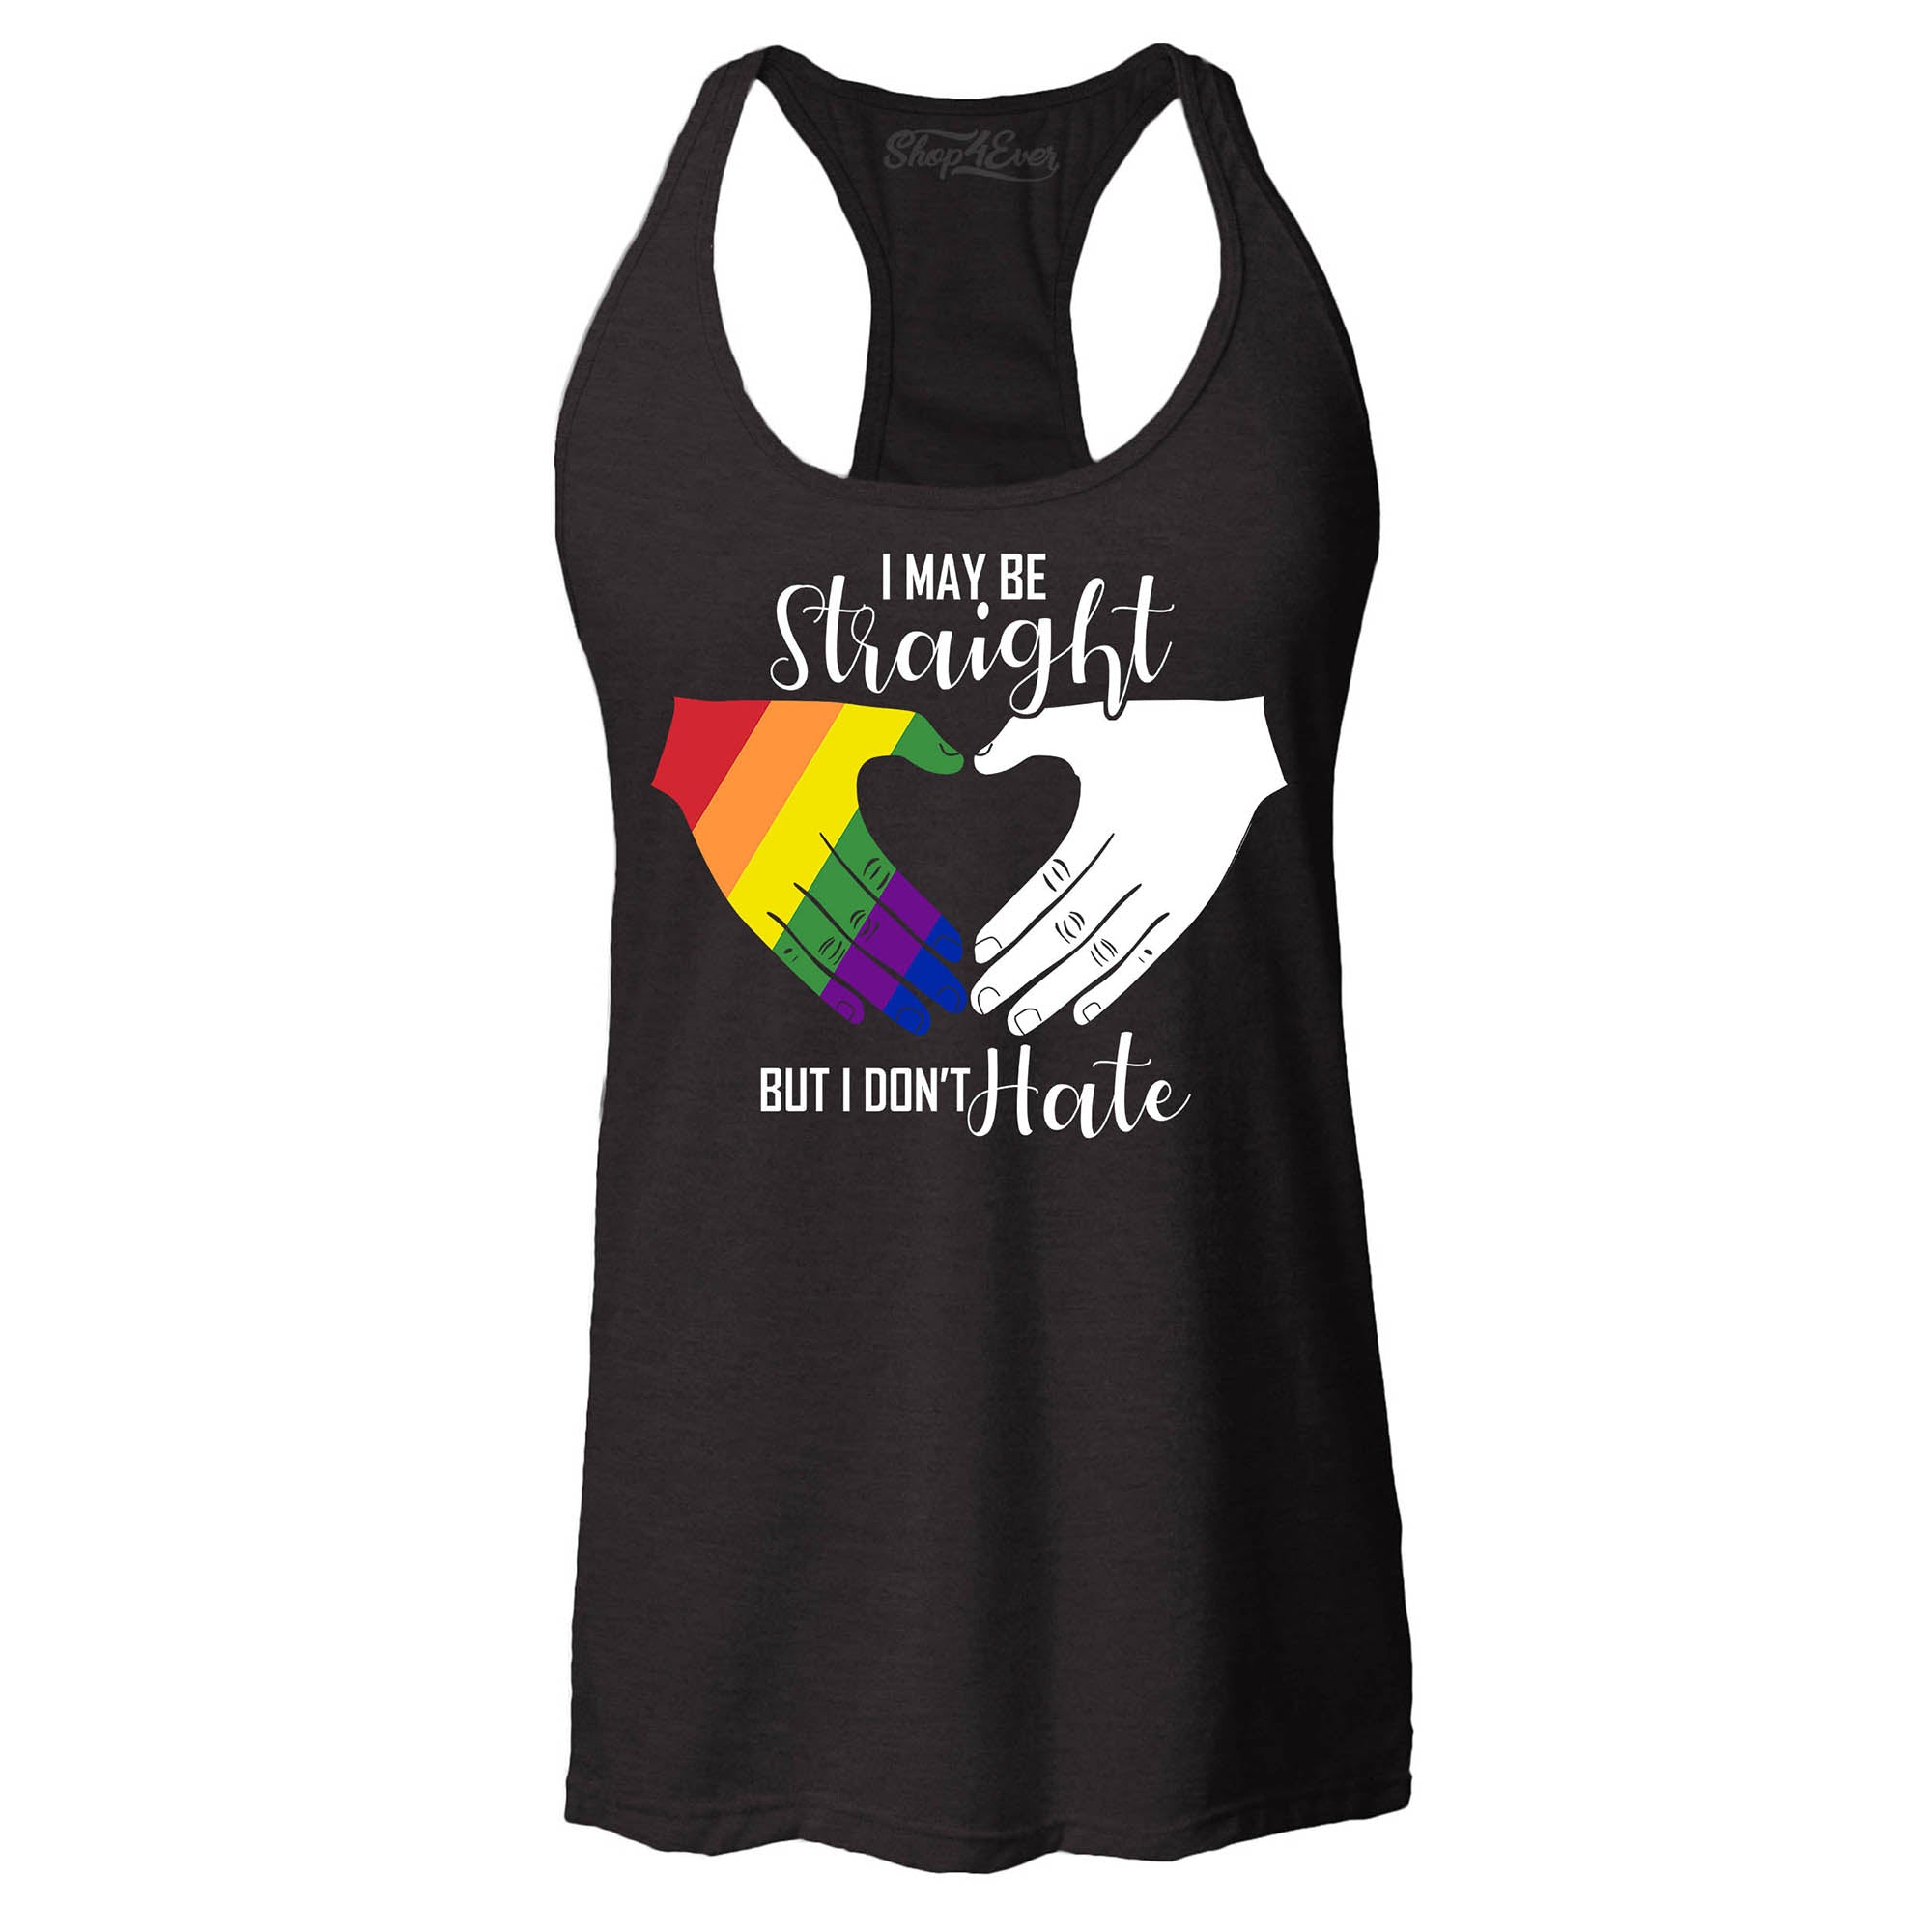 I May Be Straight but I Don't Hate ~ Gay Pride Women's Racerback Tank Top Slim Fit